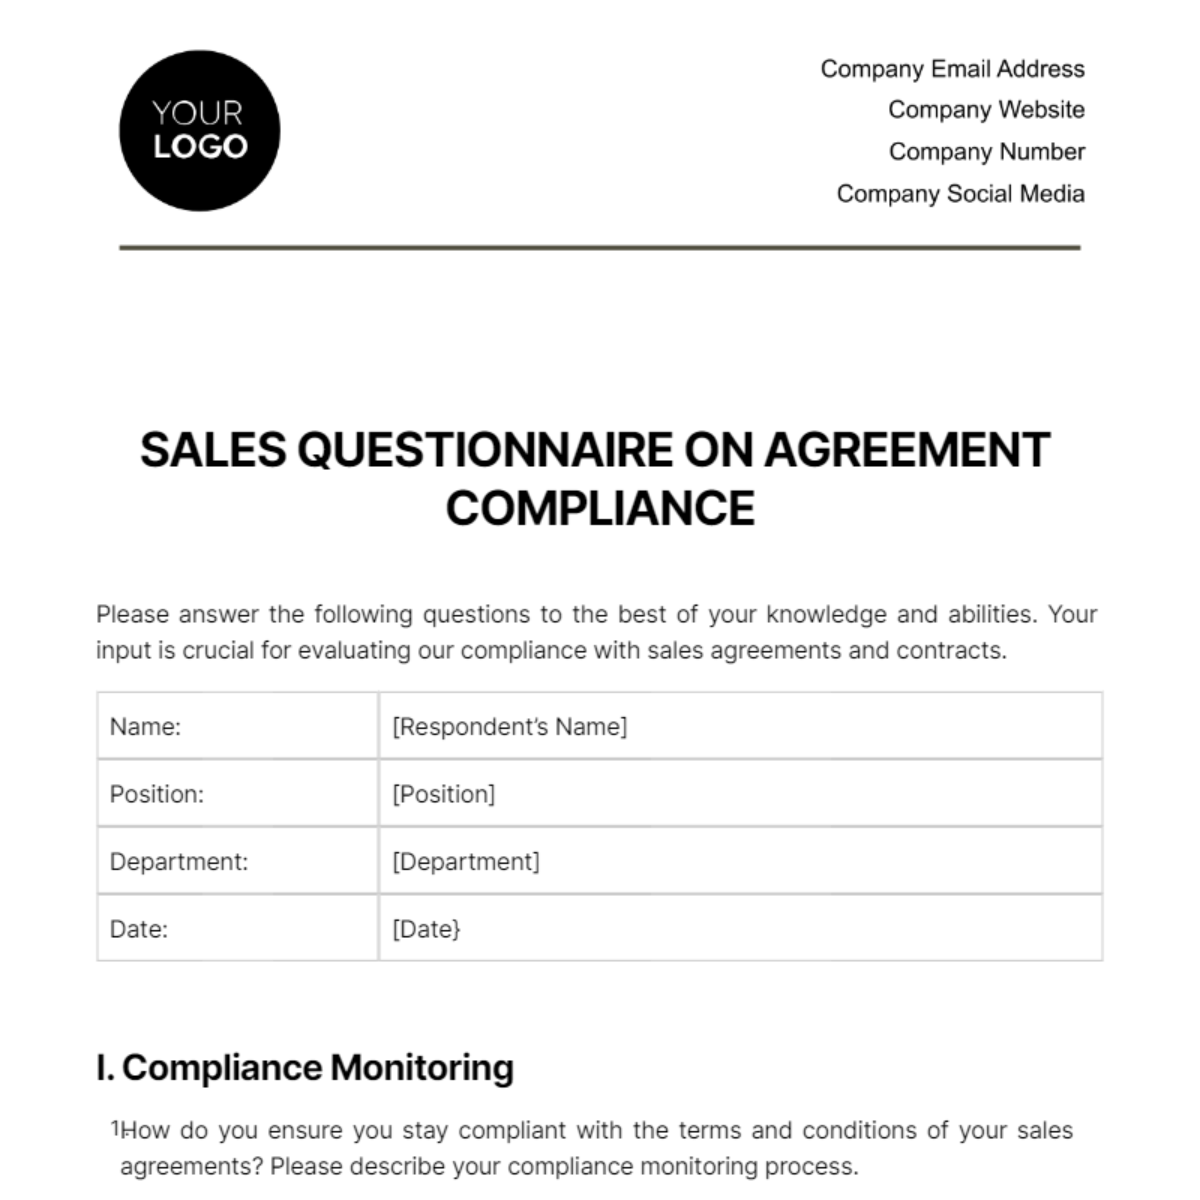 Sales Questionnaire on Agreement Compliance Template